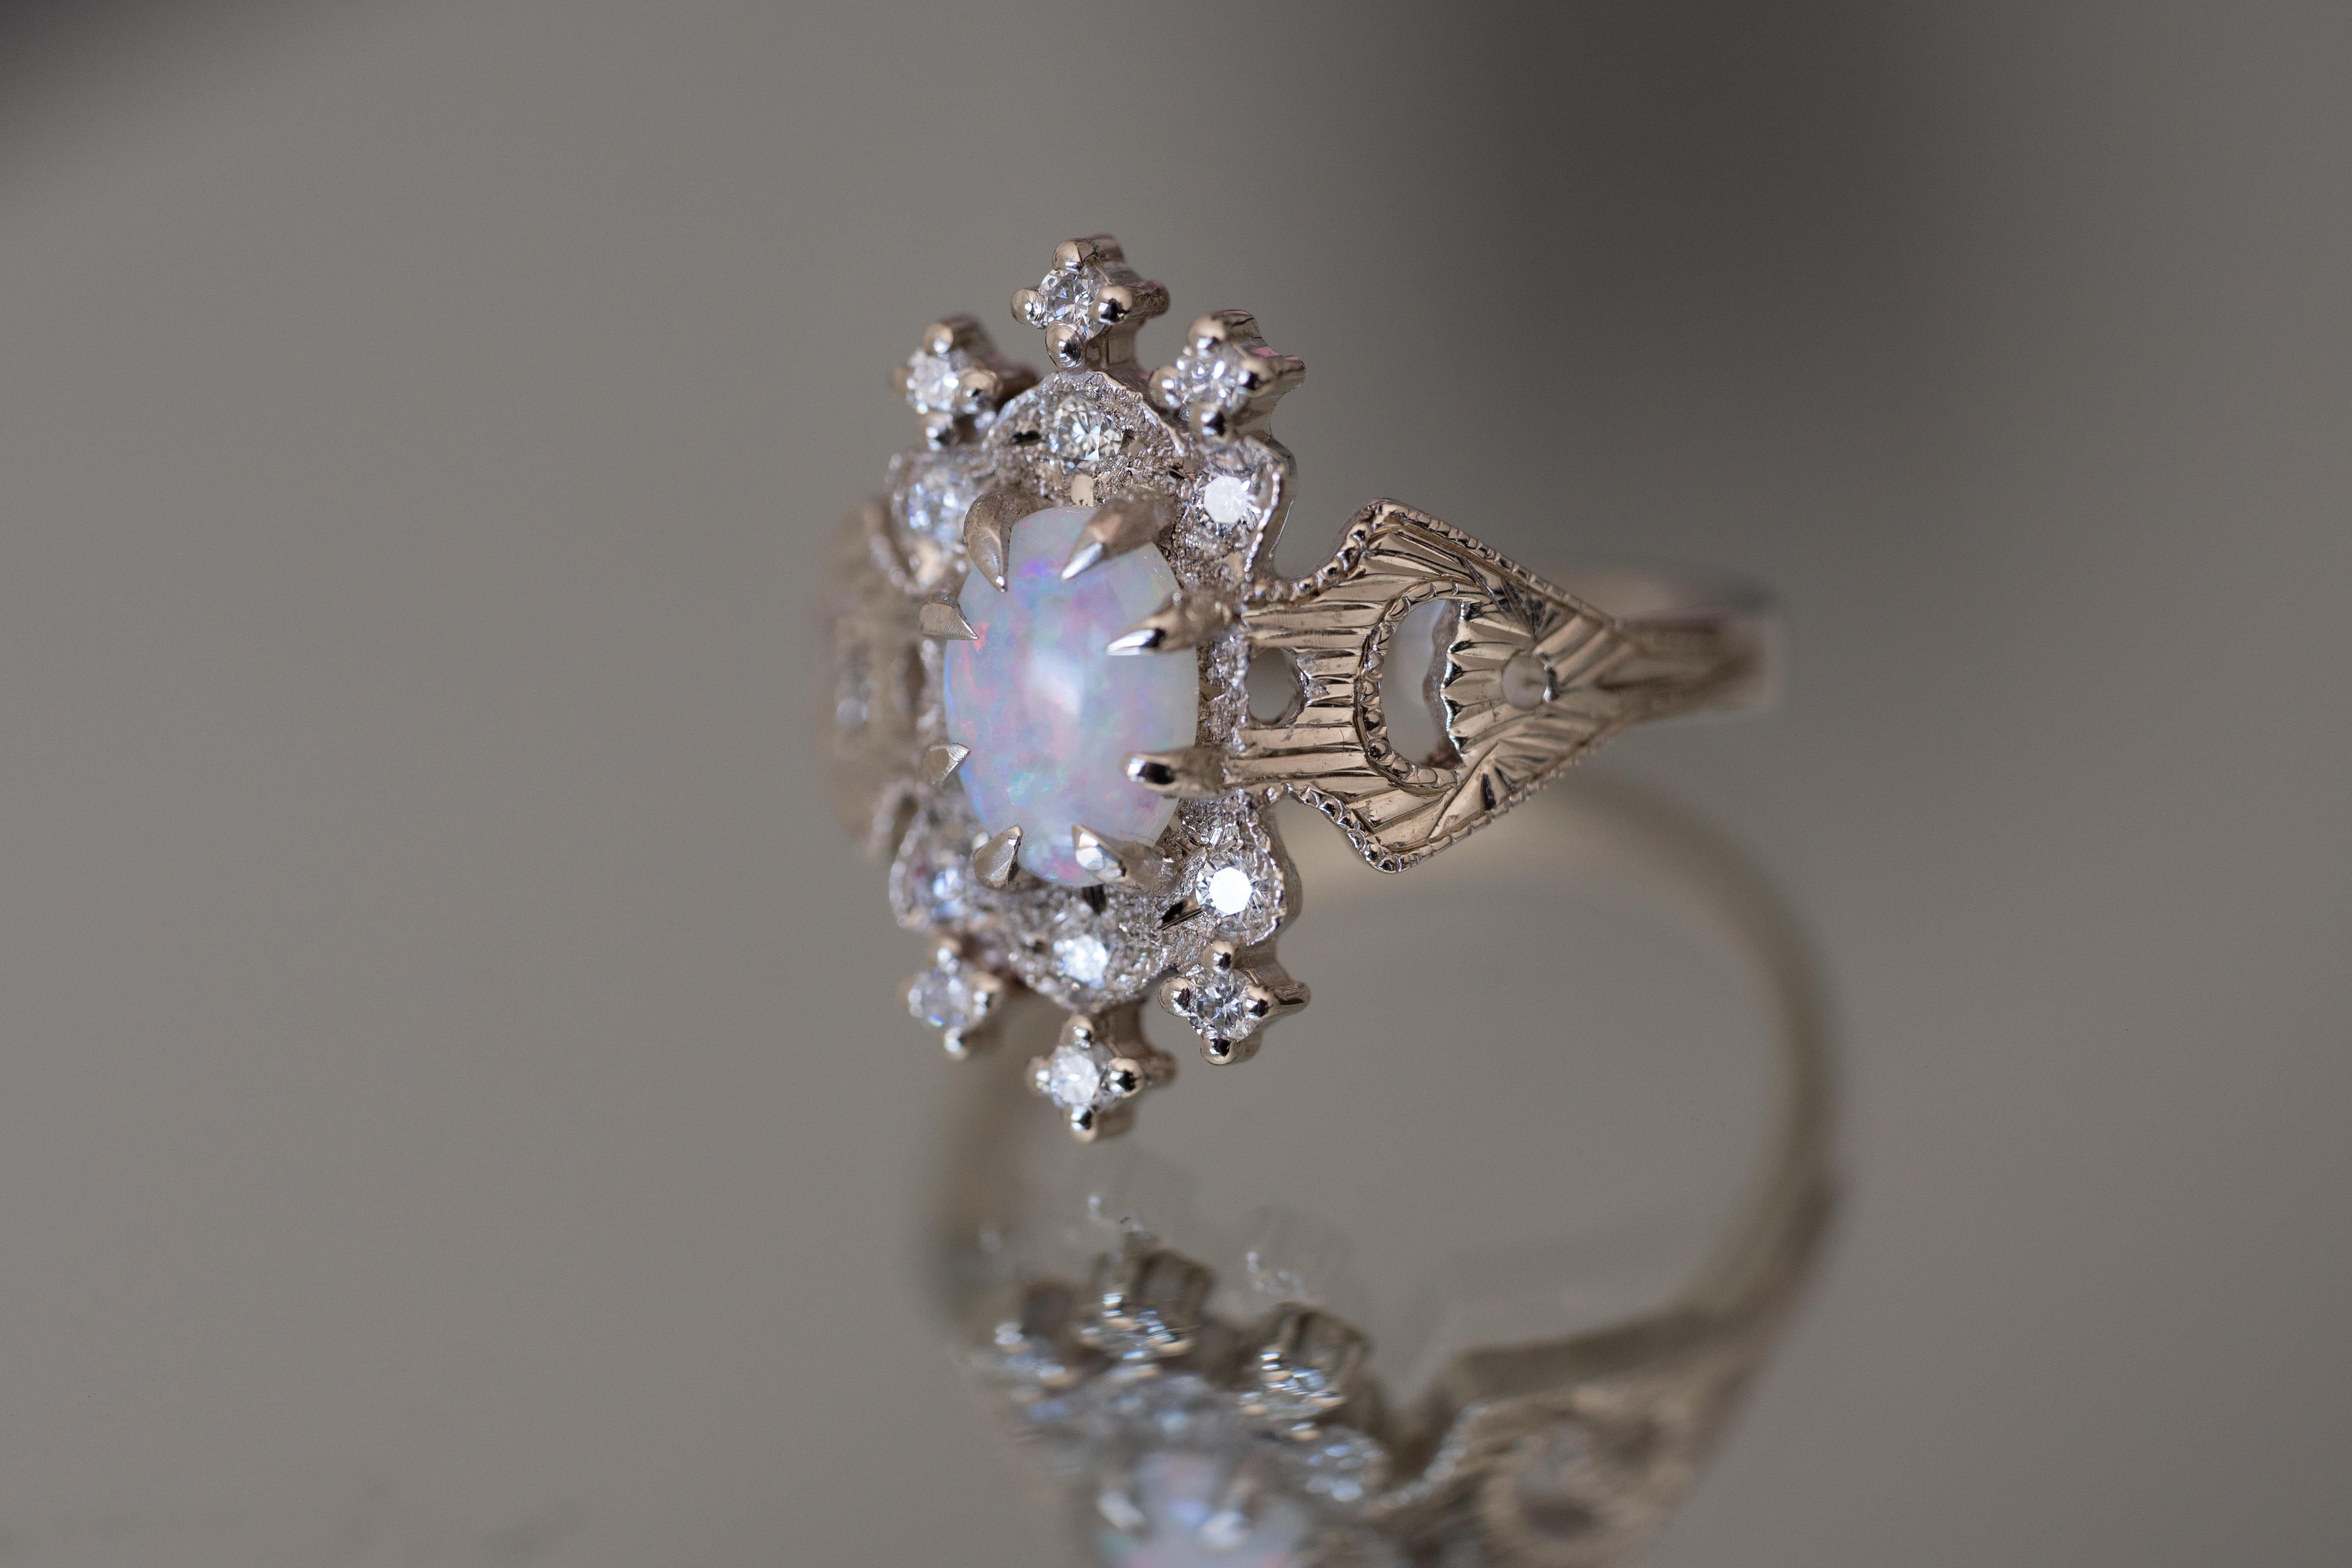 For Sale:  0.7 Carat Australian Opal Diamond Oval Cut Claw Prong Moon Crescent Lullaby Ring 14